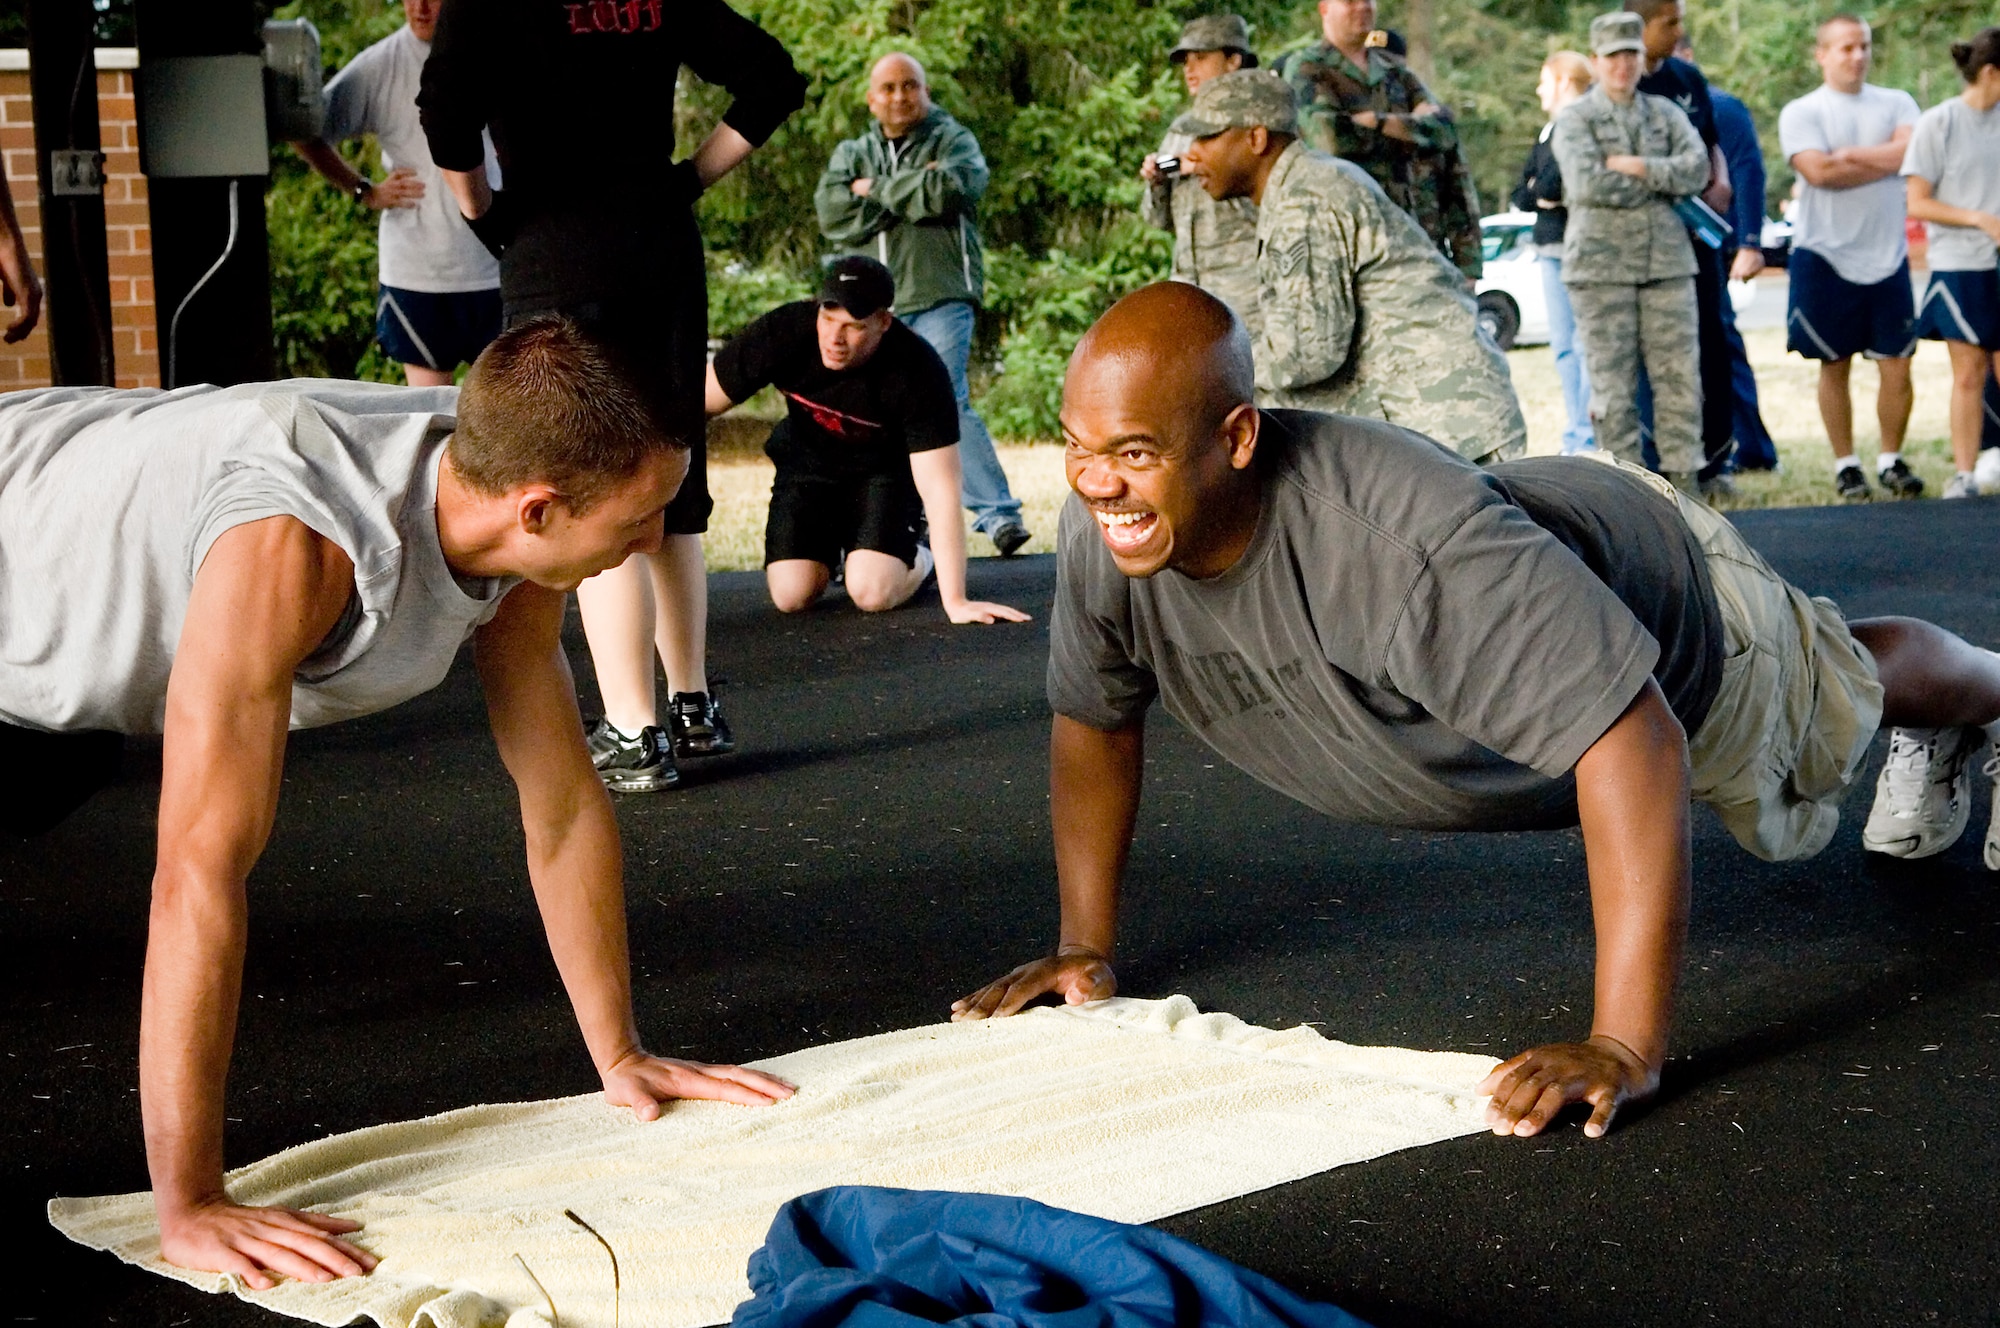 Push-up contest builds teamwork > Team McChord > Article Display